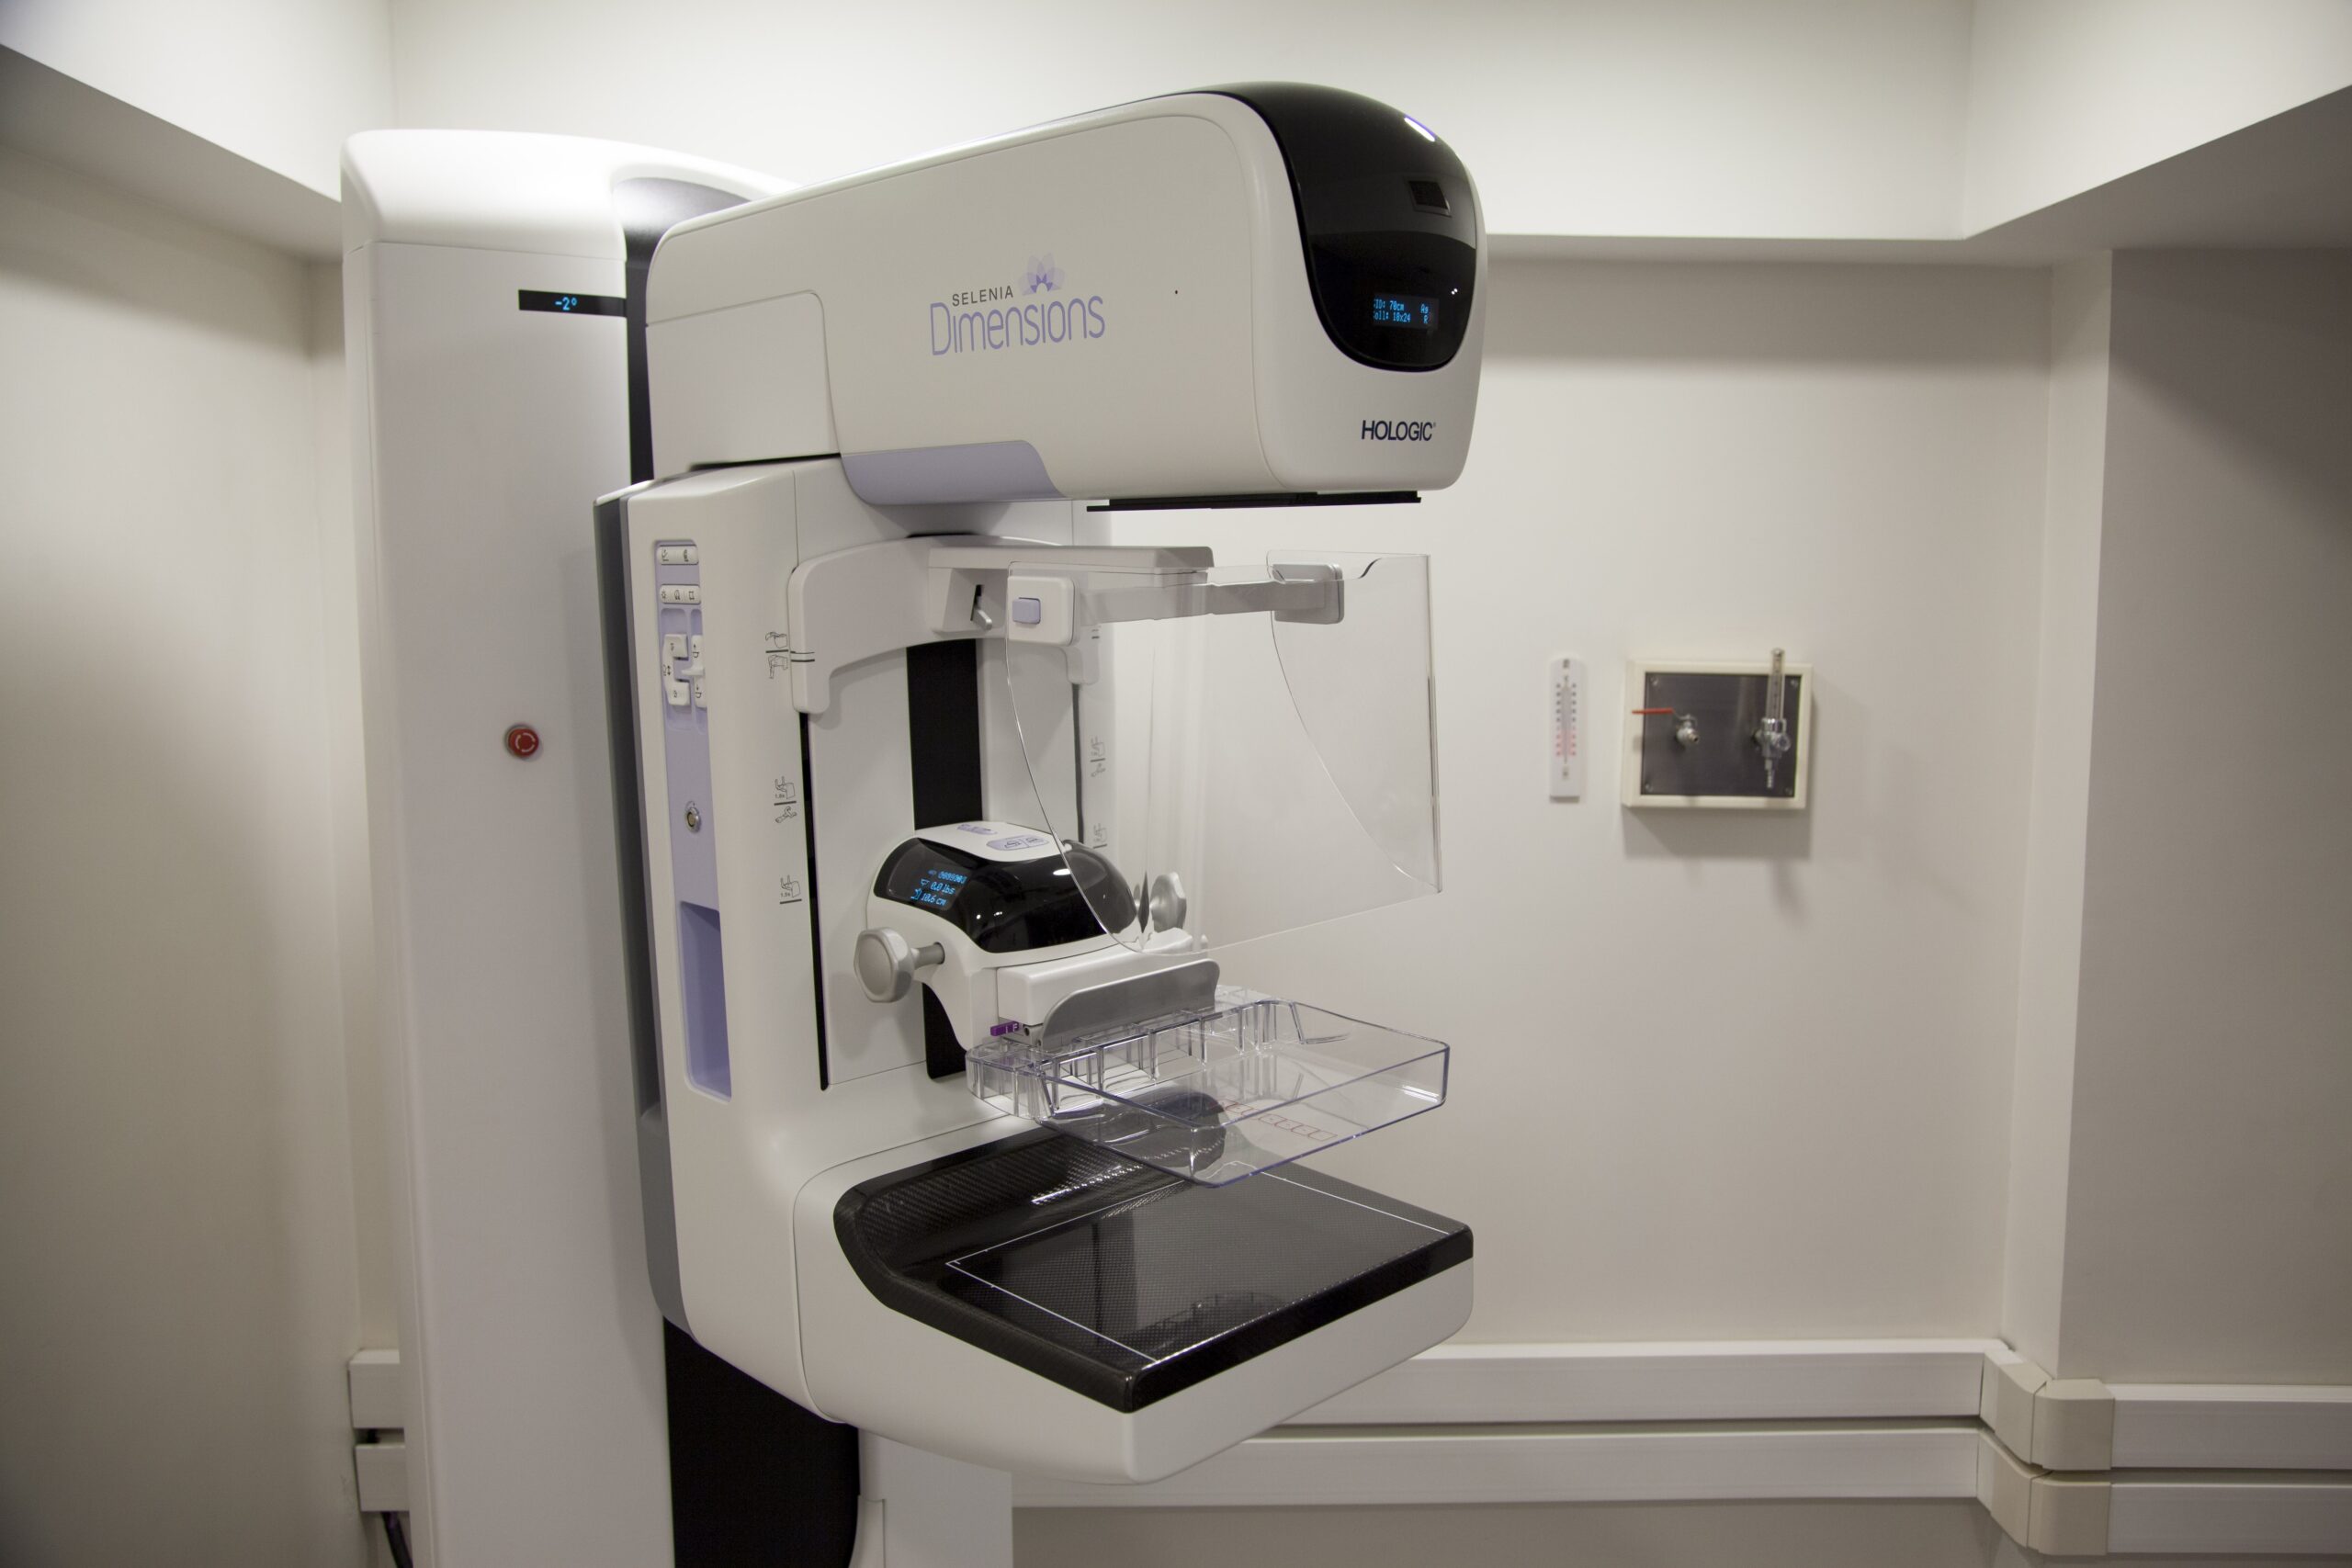 Breast cancer and diabetic eye screening to be first beneficiaries of NHS £70m digitisation scheme